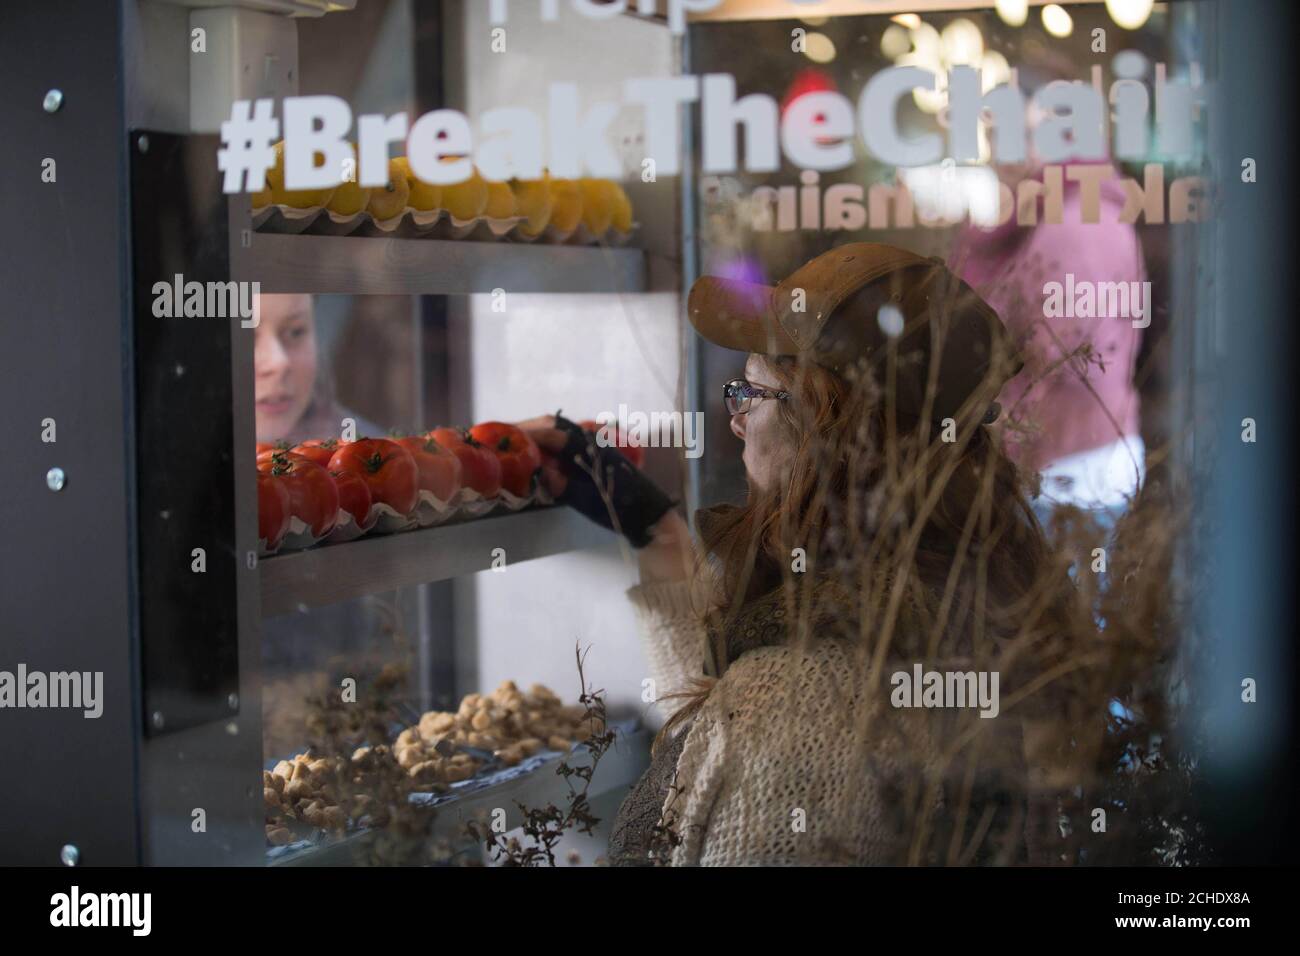 EDITORIAL USE ONLY Courtney Derrico a student from the University of Hull trapped inside a human vending machine to illustrate modern-day slavery practices hidden within our food, on Human Rights Day in London. Stock Photo